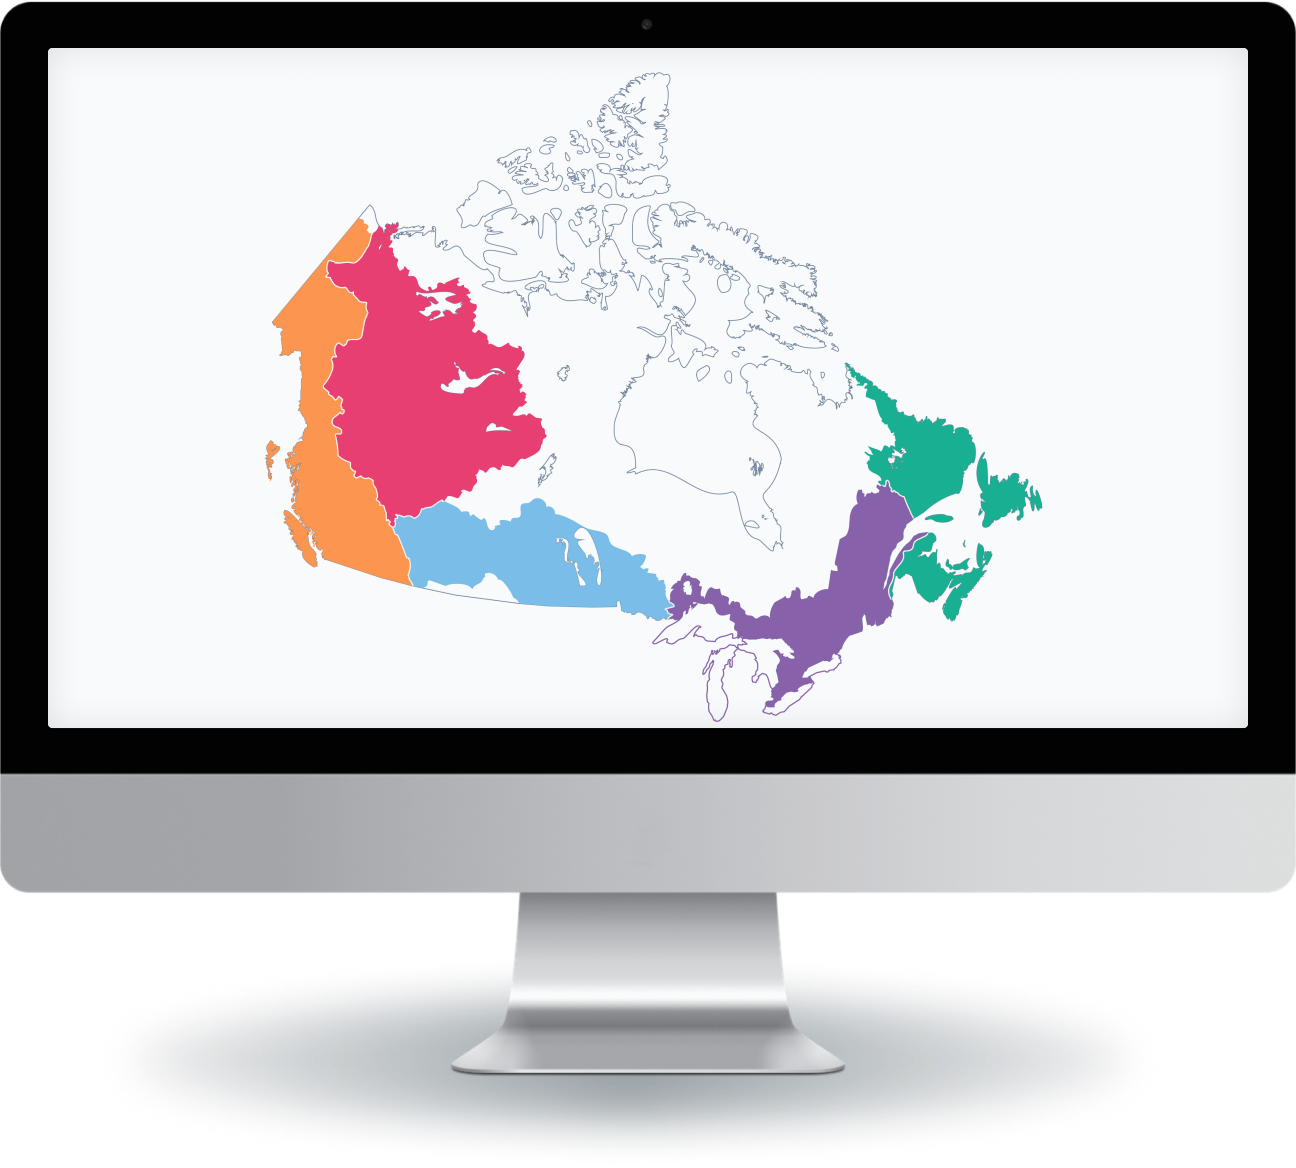 Computer monitoring displaying a map of DataStream's regional hubs located across Canada.